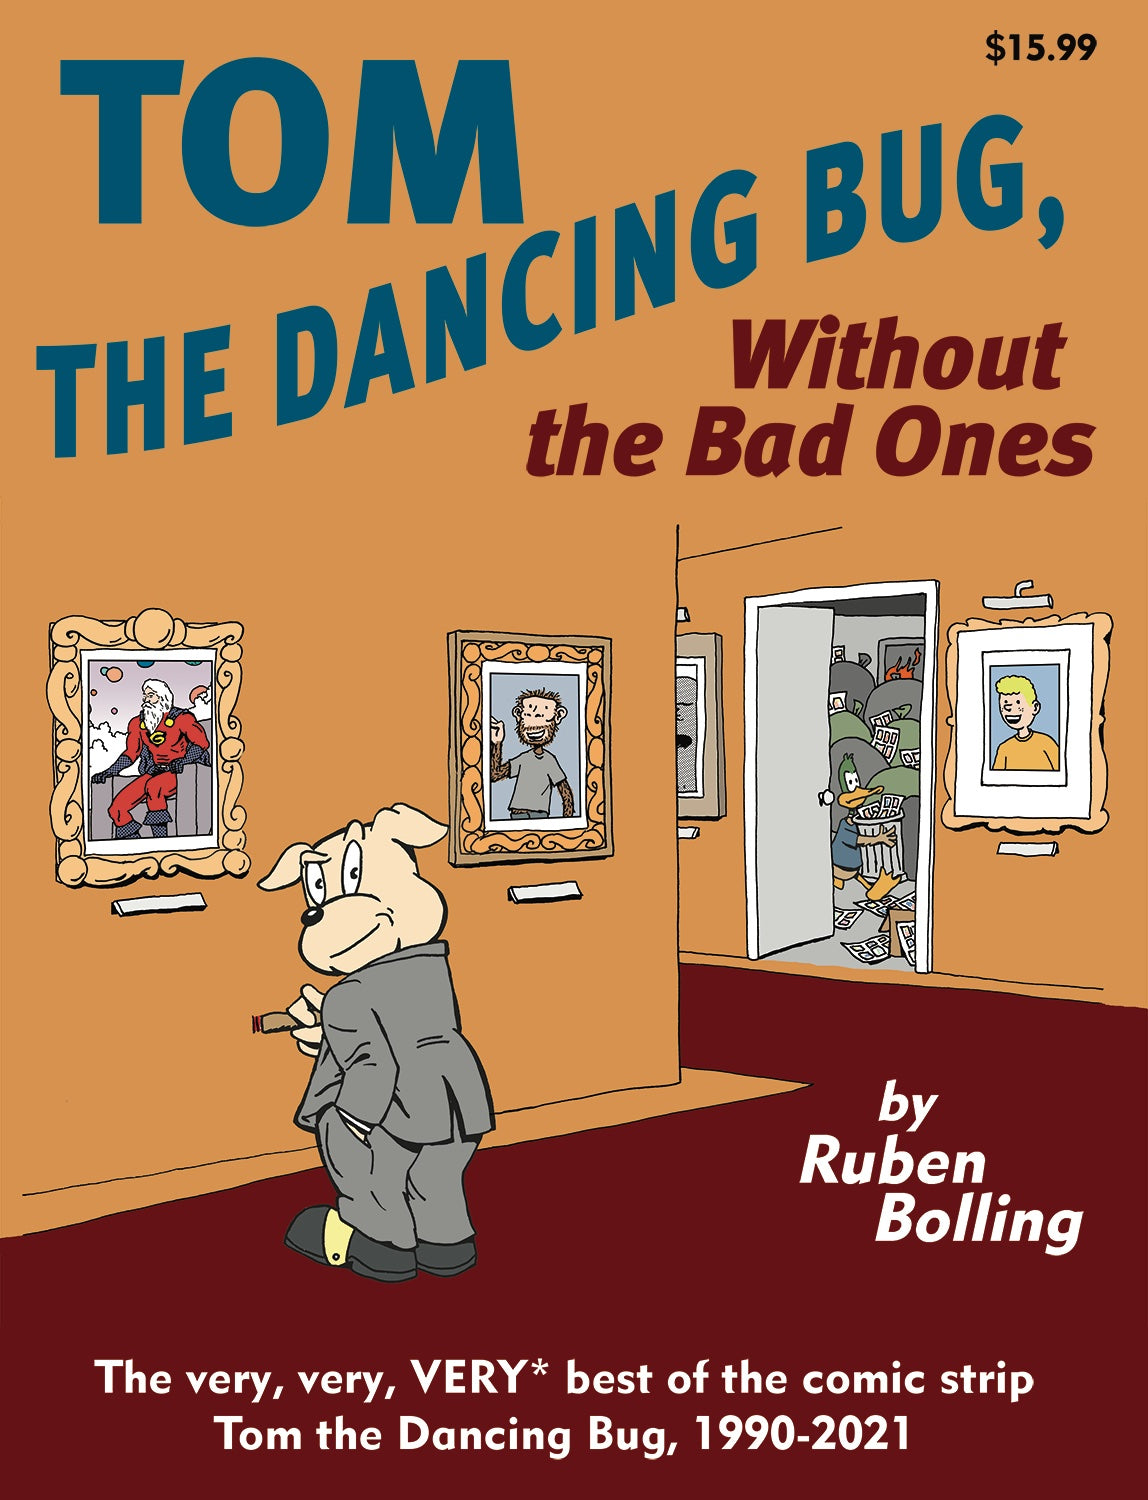 TOM THE DANCING BUG, WITHOUT THE BAD ONES